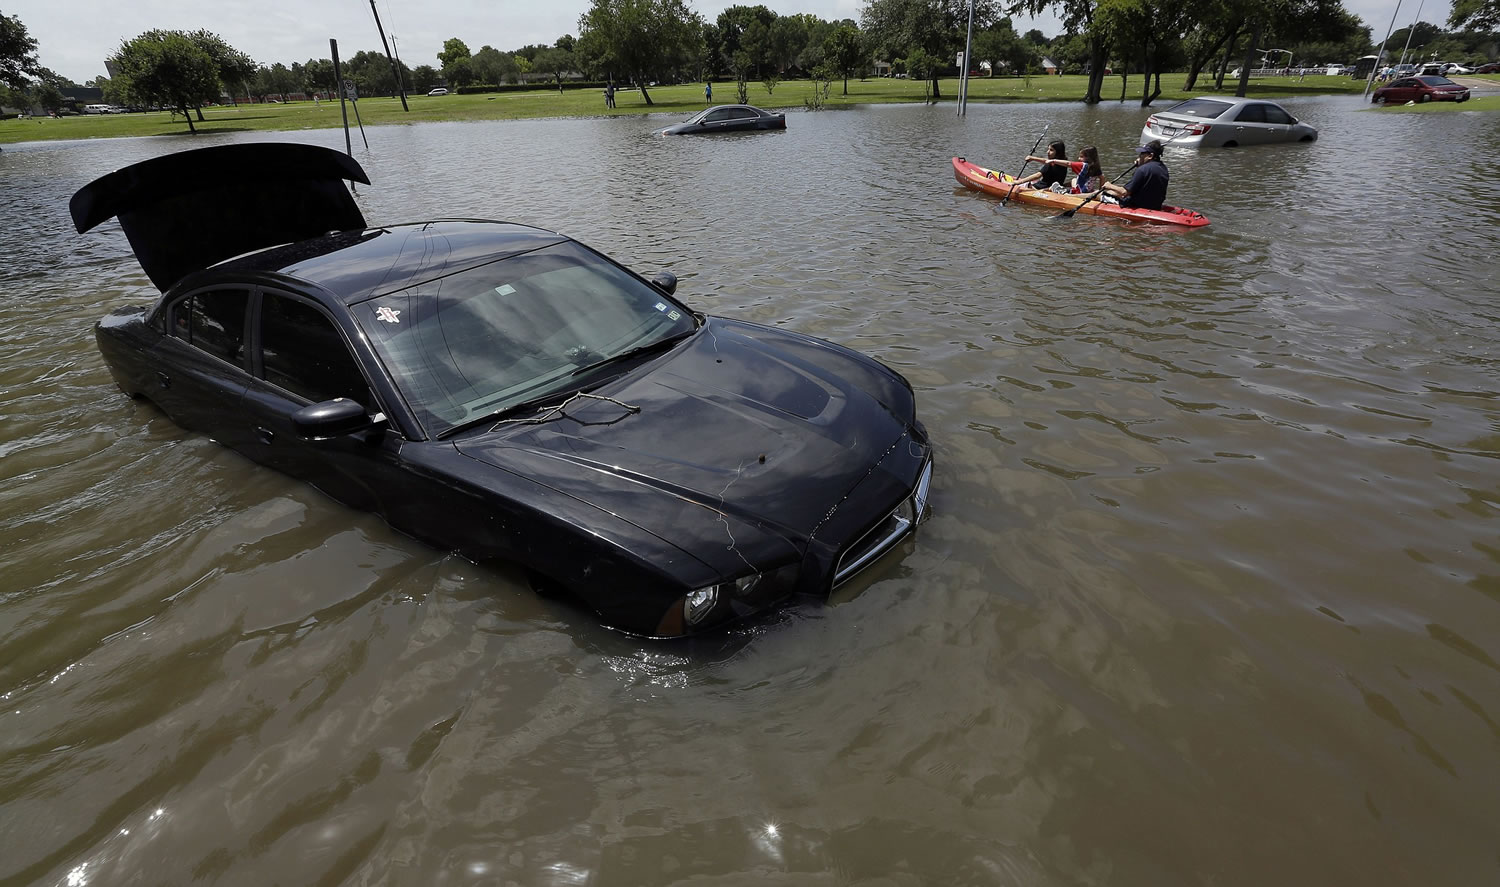 A boat is paddled down a flooded street in May in Houston. Federal officials calculated that last month was the wettest on record for the contiguous U.S. On average 4.36 inches of rain and snow fell over the Lower 48 in May, sloshing past October 2009 which had been the wettest month in U.S. records with 4.29 inches. Records go back to 1895.